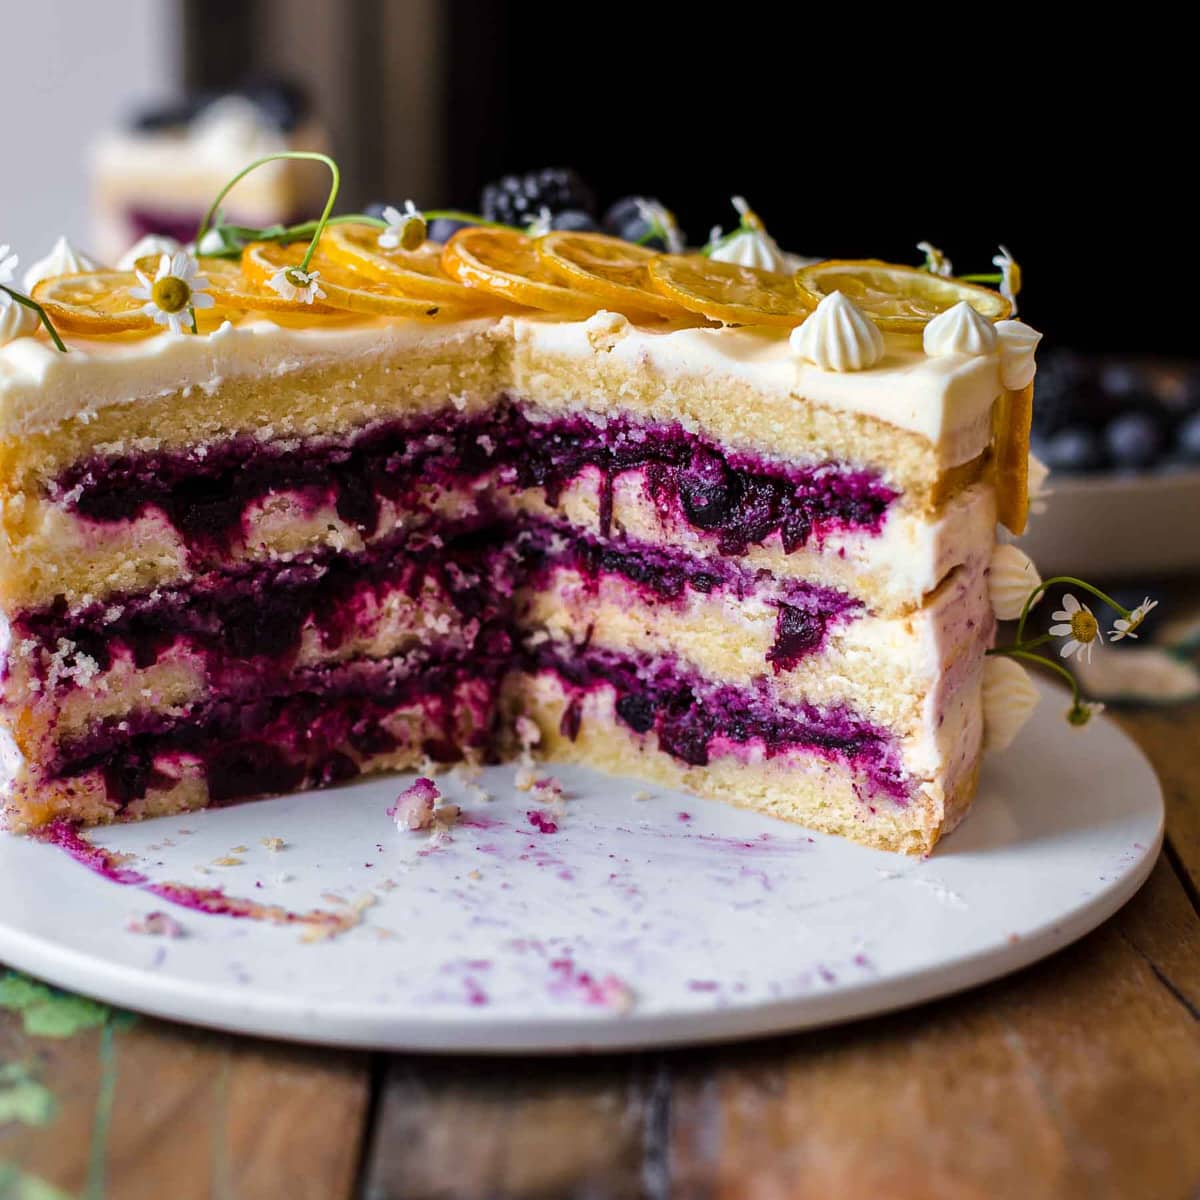 Lemon layer cake with blueberry filling on a white serving plate with one third of the cake missing